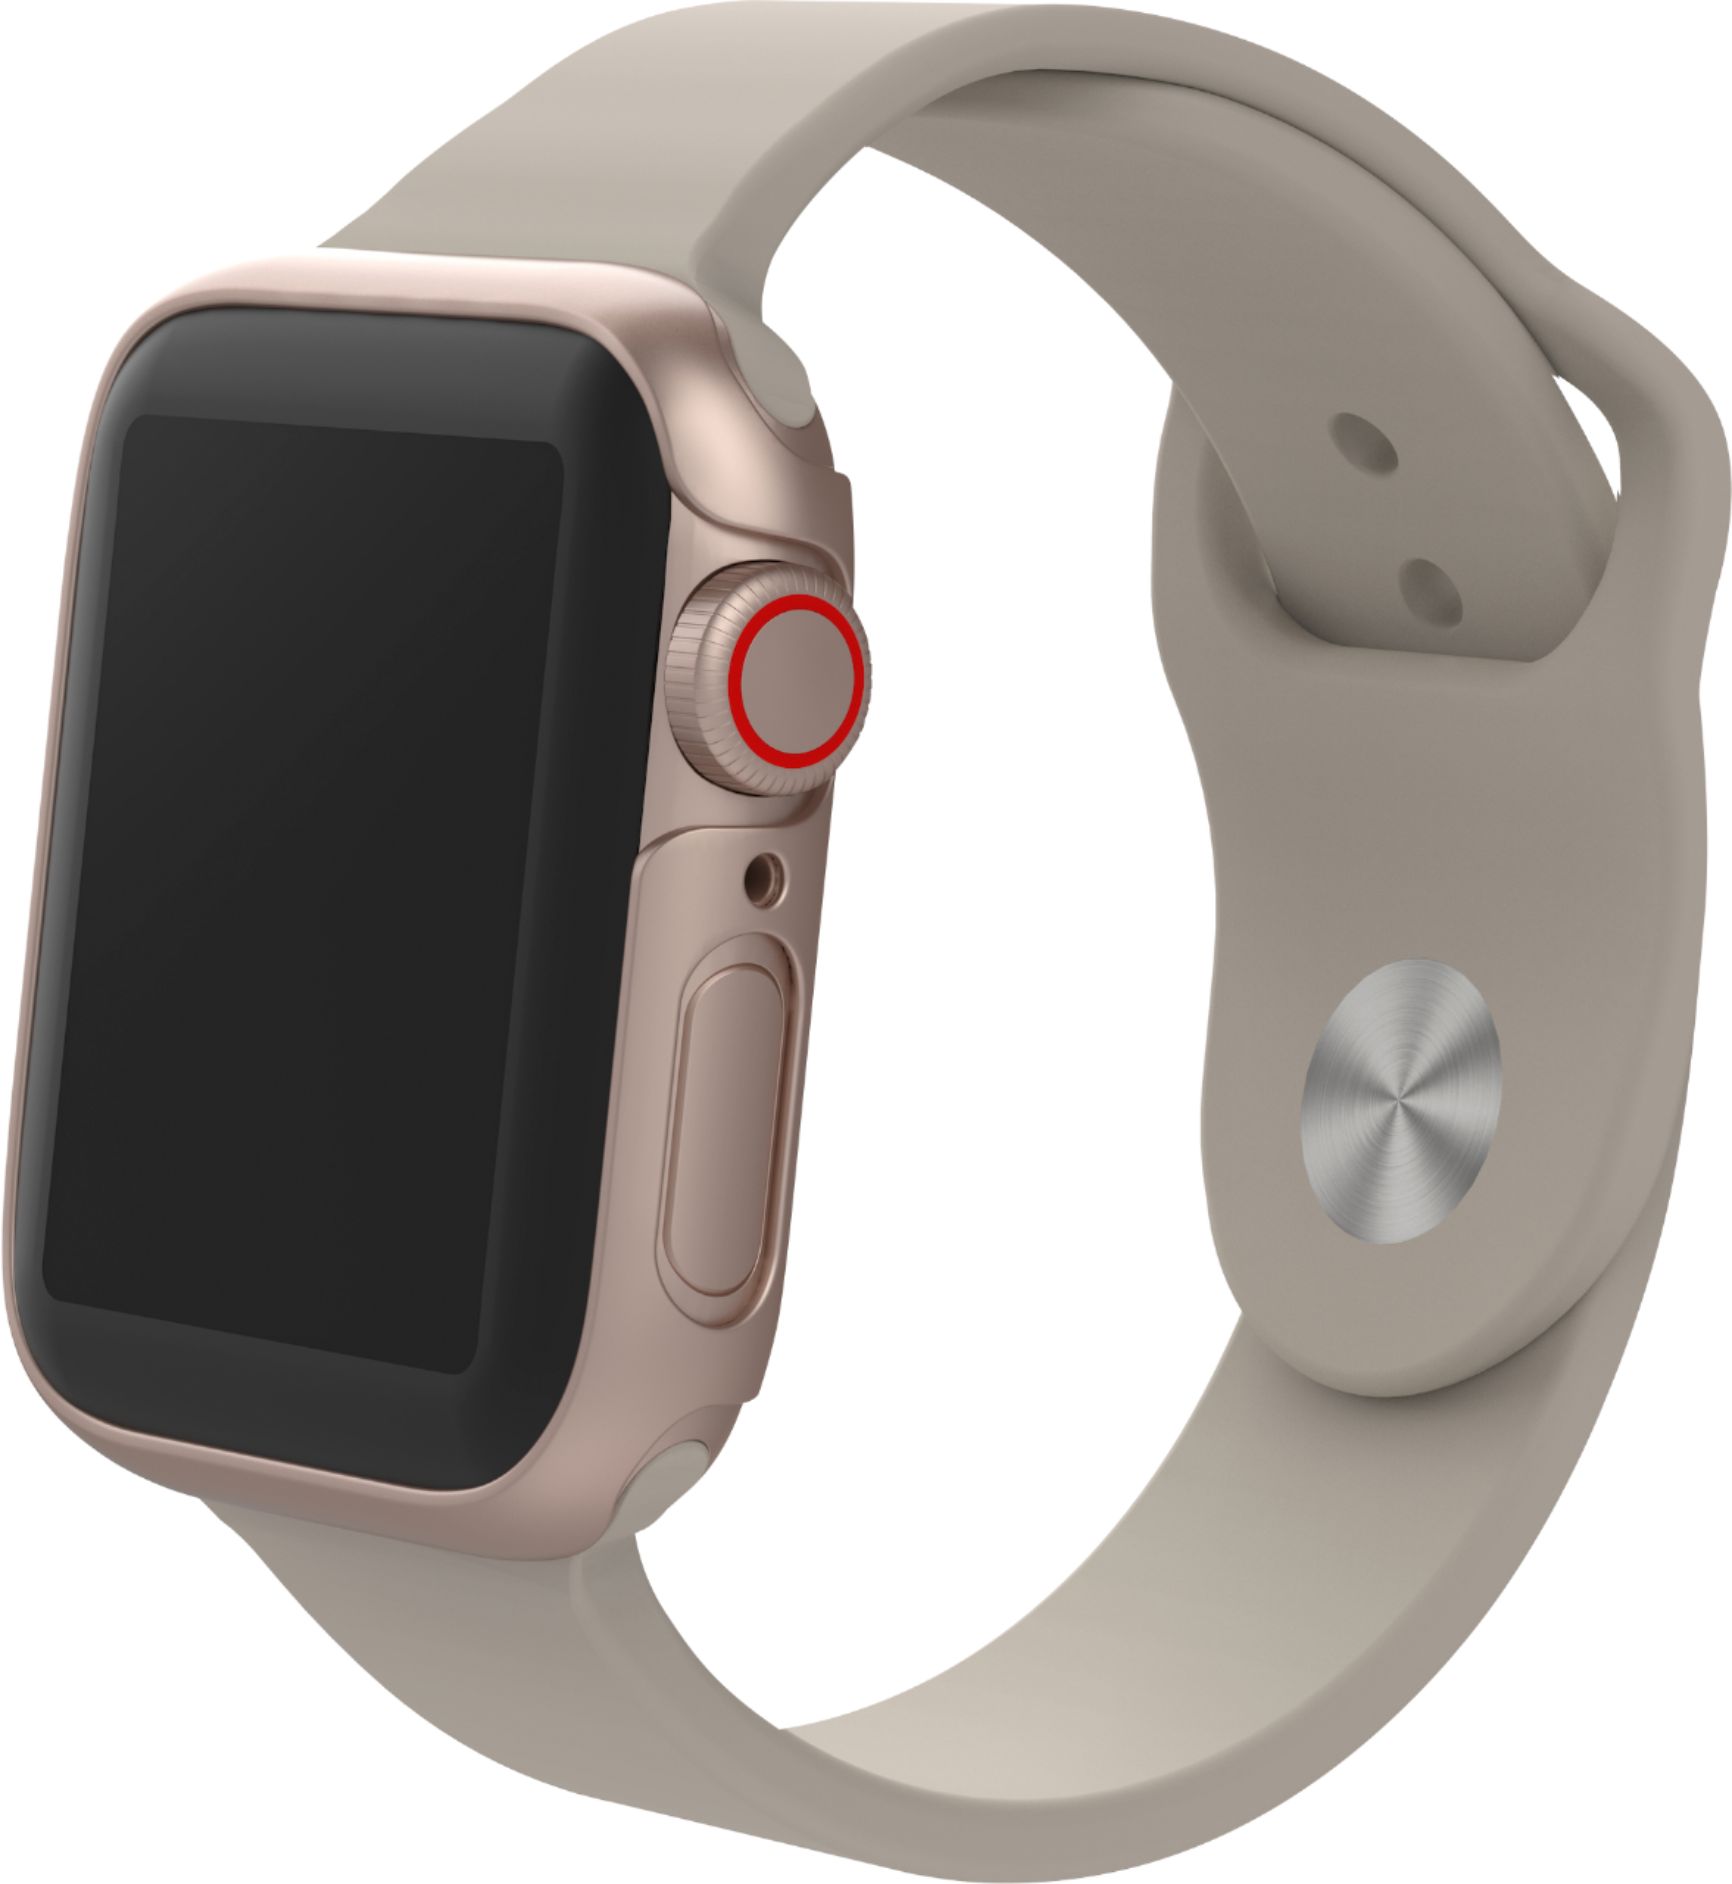 Left View: ZAGG - InvisibleShield GlassFusion 360 Screen Protector for Apple Watch Series 4, Series 5, SE, Series 6 40mm - Gold